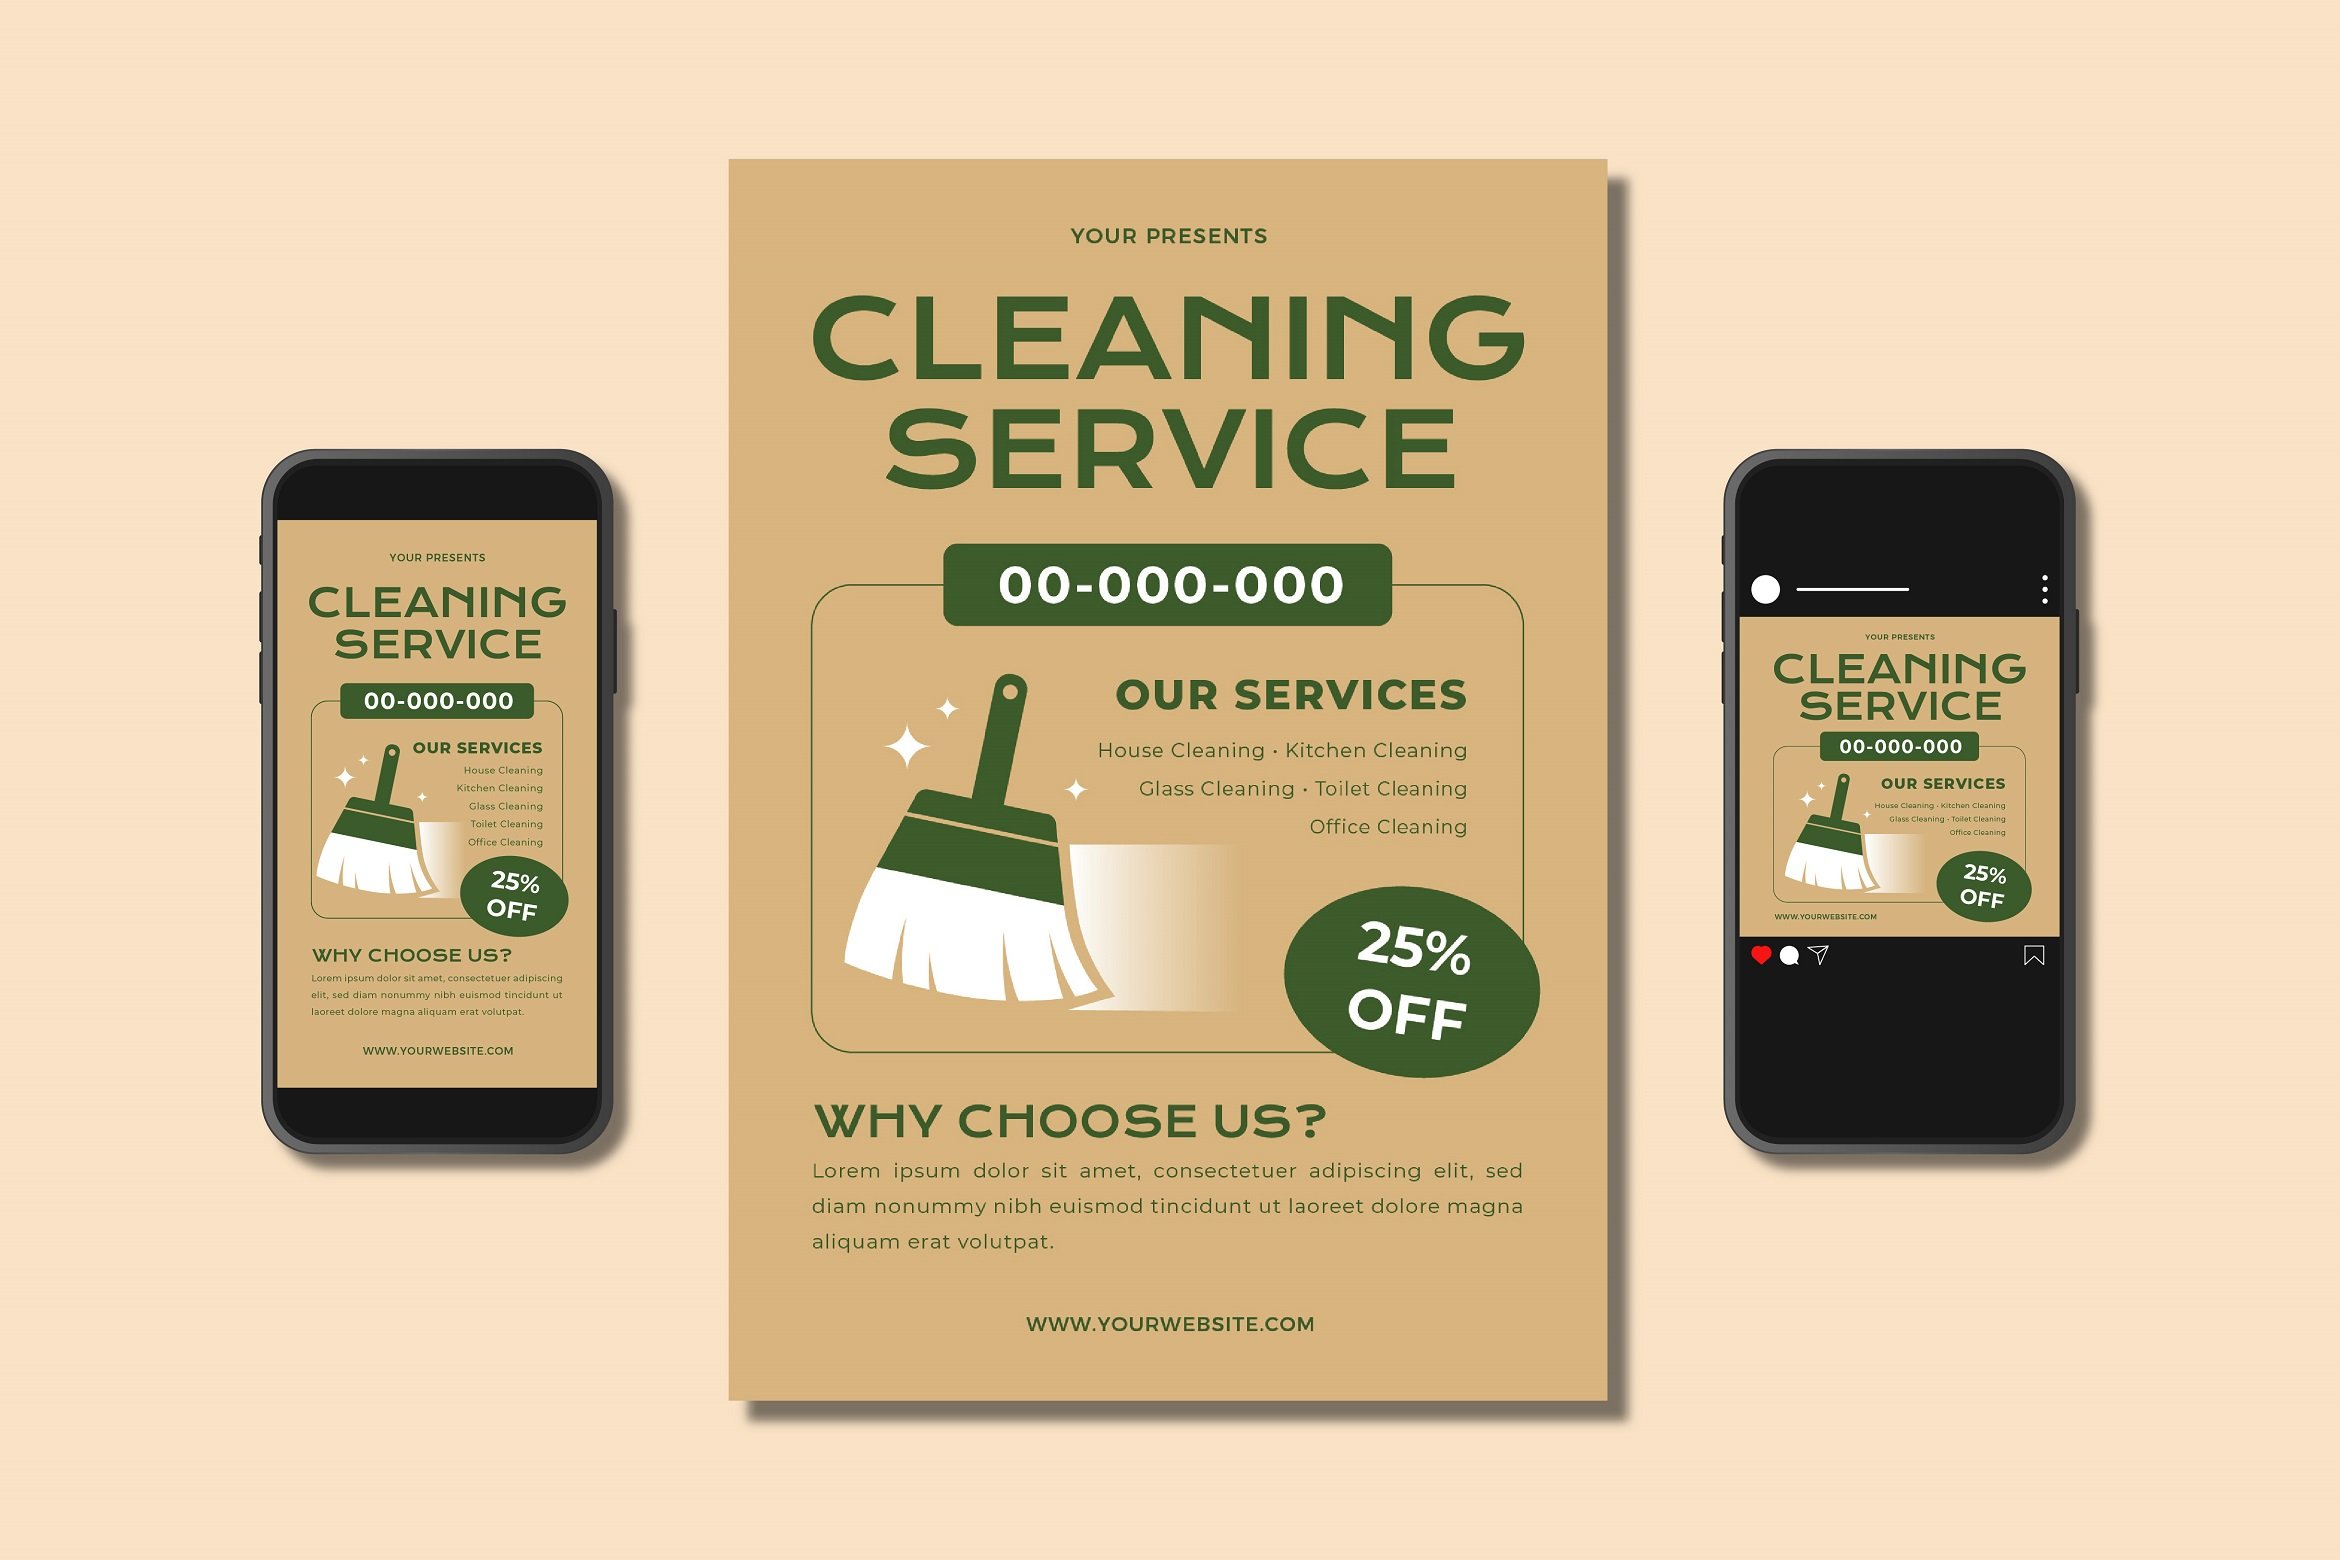 Cleaning Service Flyer Set cover image.